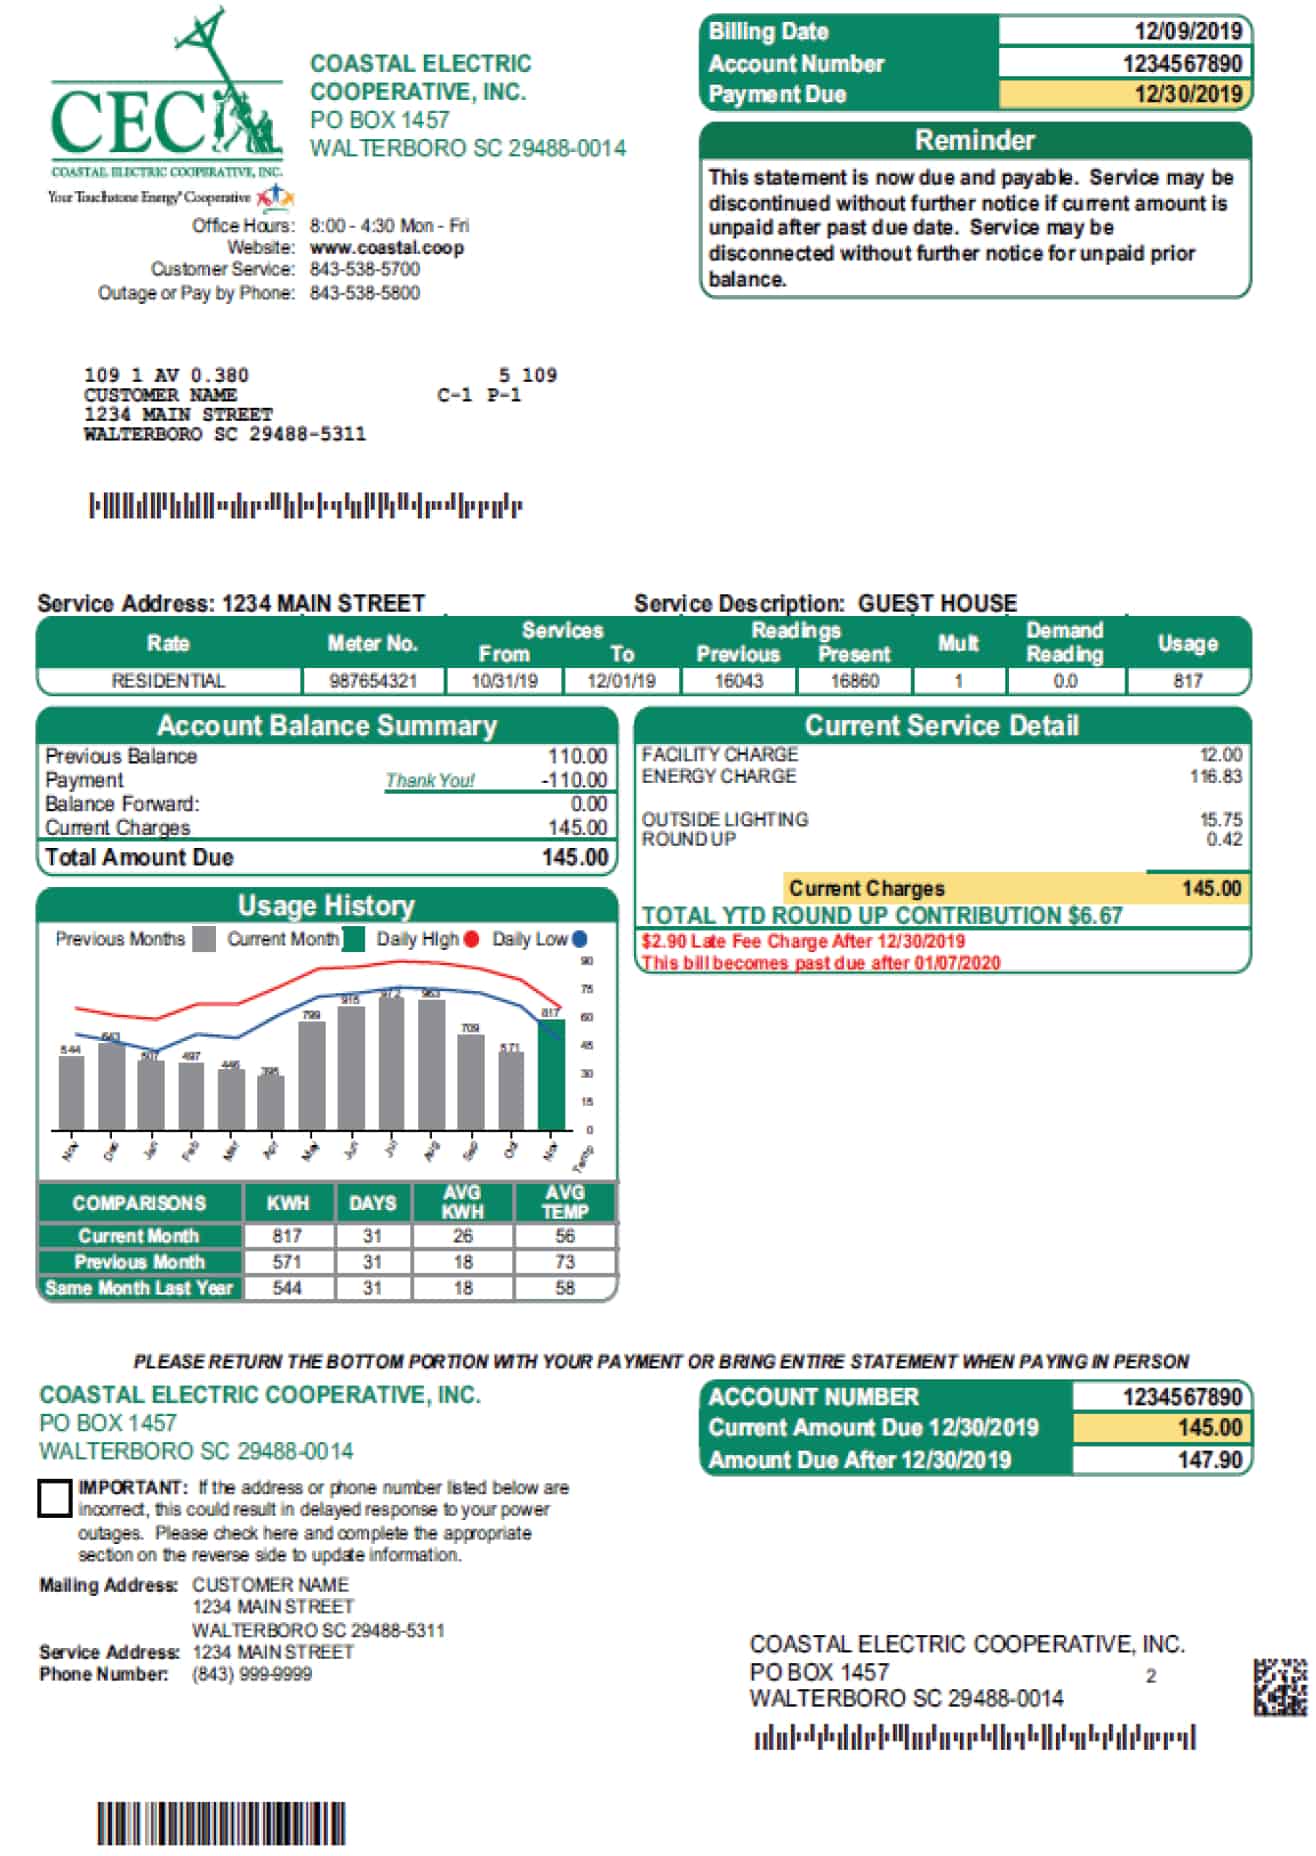 A sample CEC electric bill with descriptions of each section.